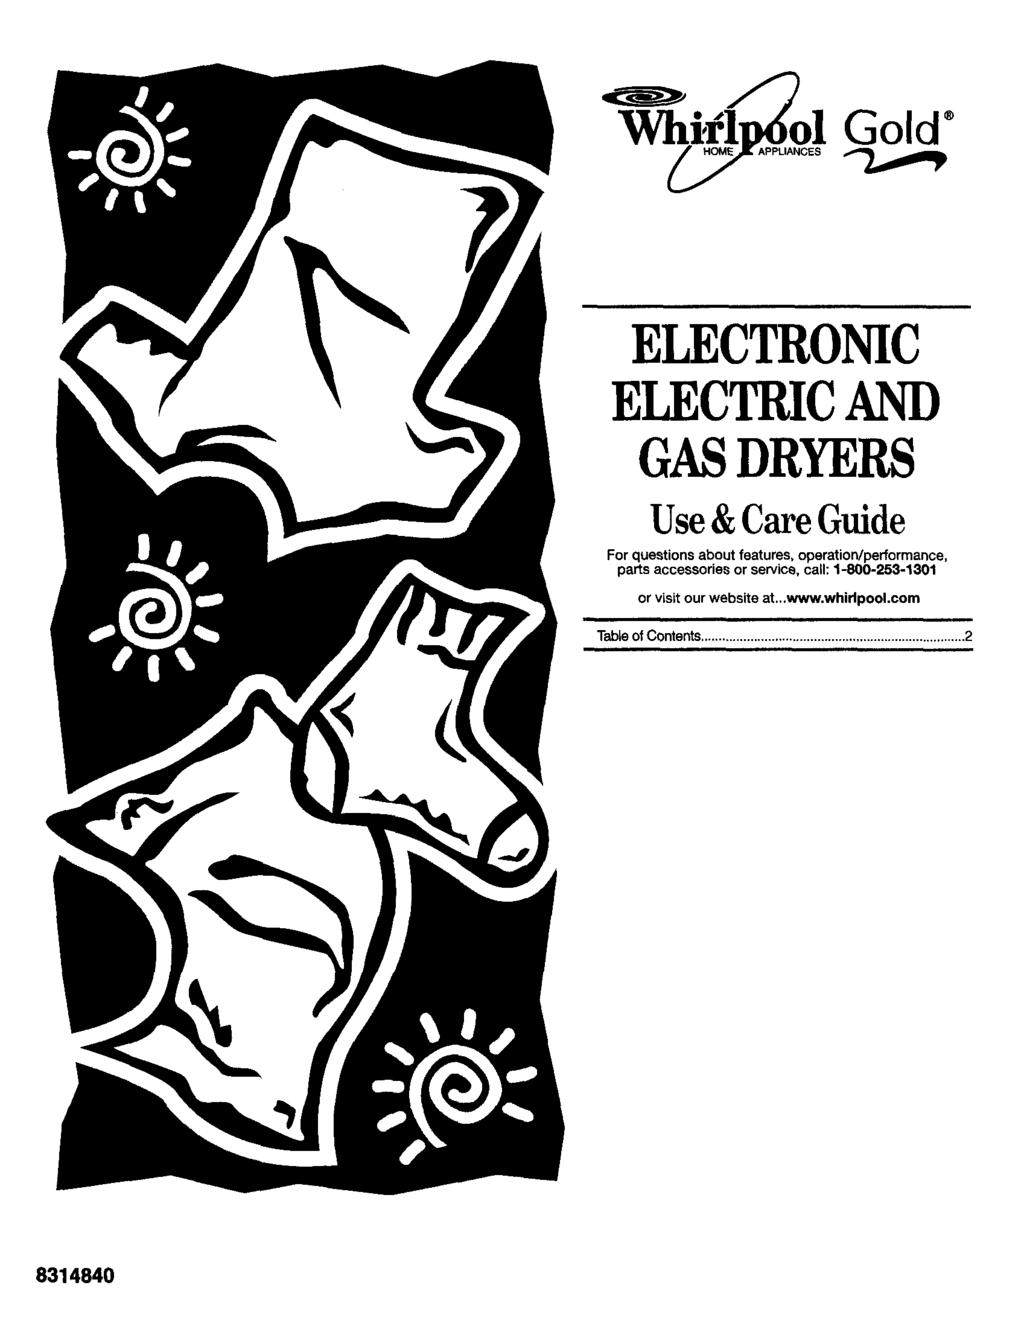 ELECTRONIC ELECTRICAND GASDRYERS Use &CareGuide For questions about features, operation/performance, parts